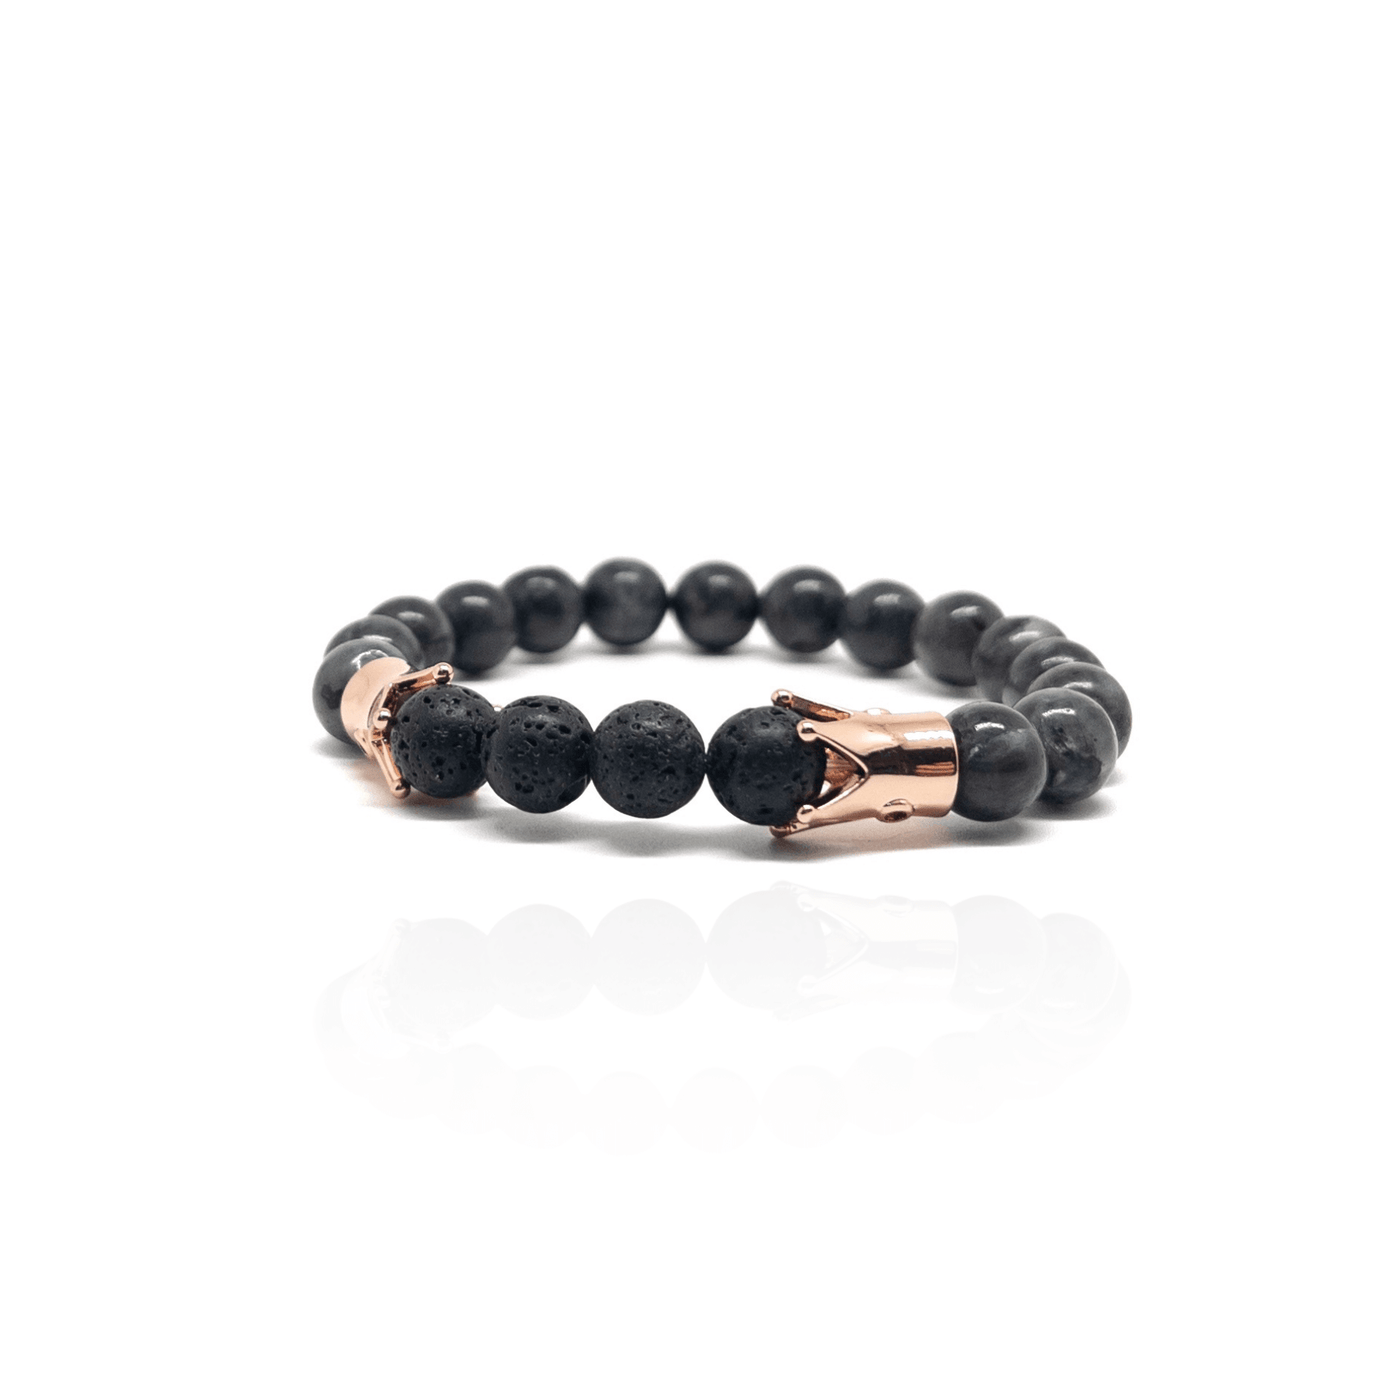 The Rose Gold Plated Double King bracelet